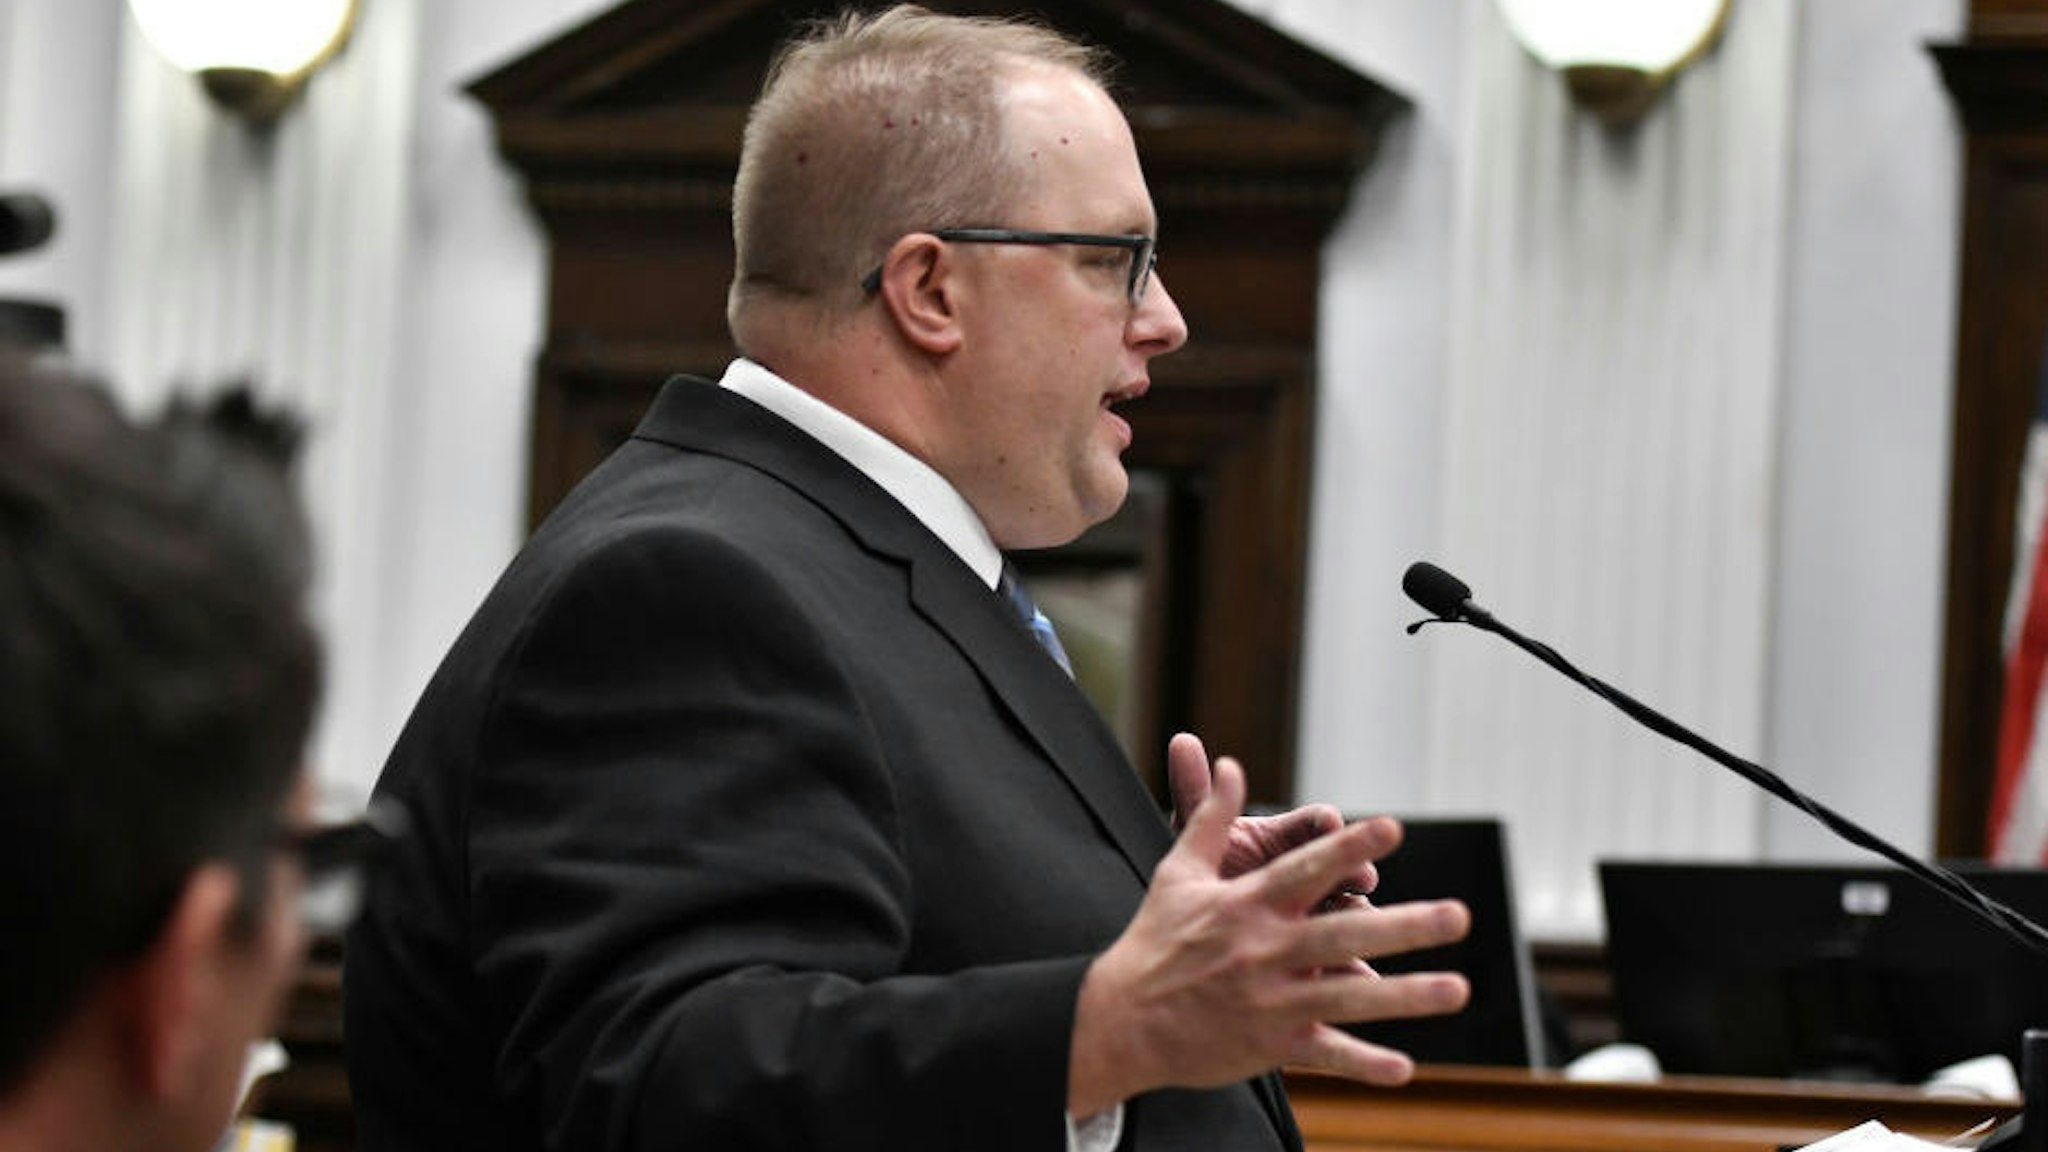 Assistant District Attorney James Kraus gives the rebuttal to the closing argument from the defense during Kyle Rittenhouse's trial at the Kenosha County Courthouse on November 15, 2021 in Kenosha, Wisconsin.